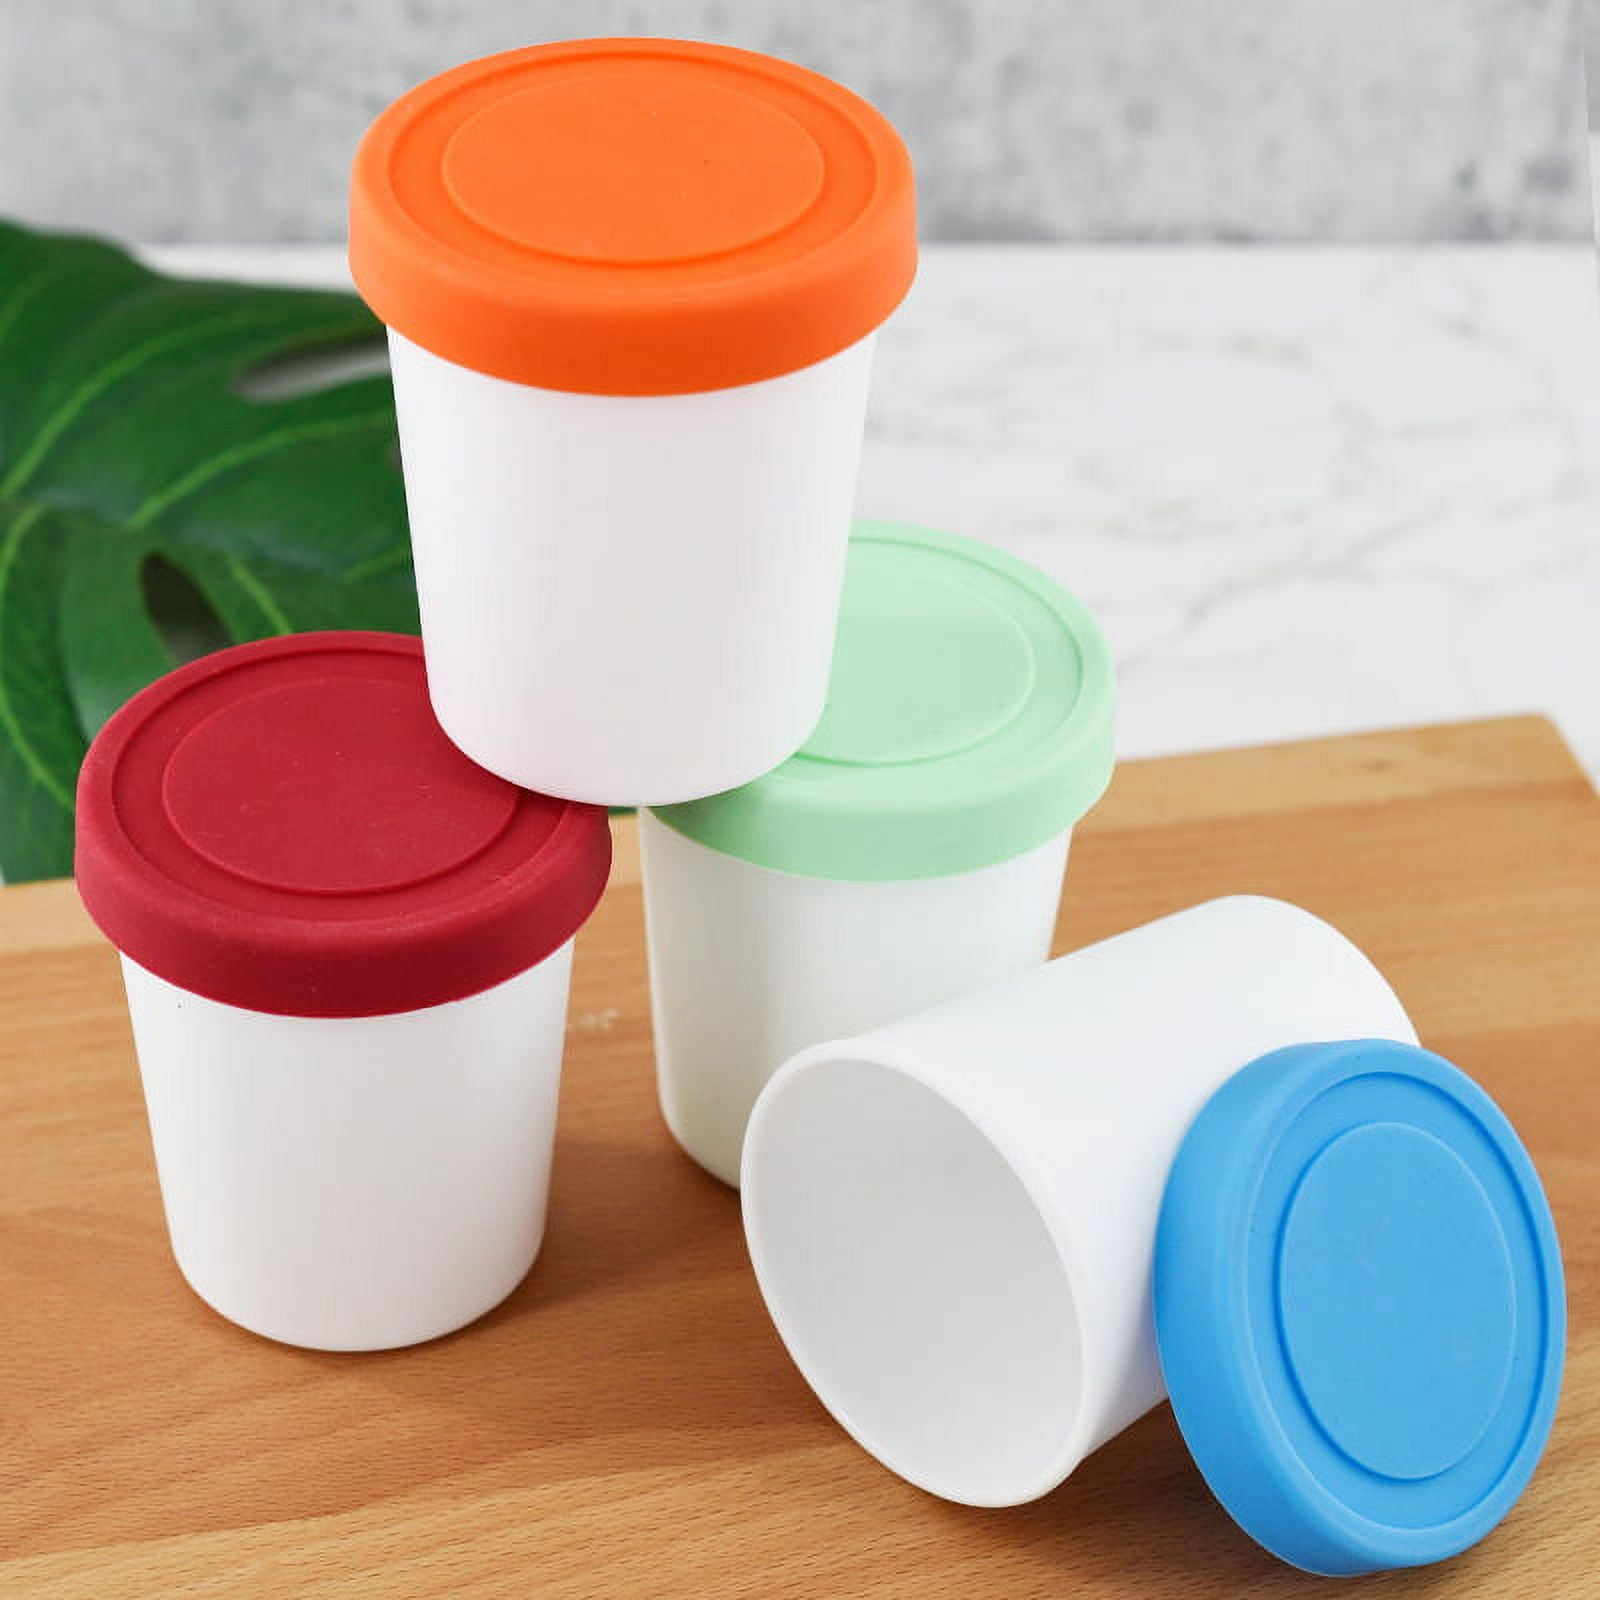 Lin Ice Cream Storage Tubs with Lids 4-Pack - 1 Quart Round Reusable BPA-Free Freezer Containers for Homemade Ice Cream, Sorbet